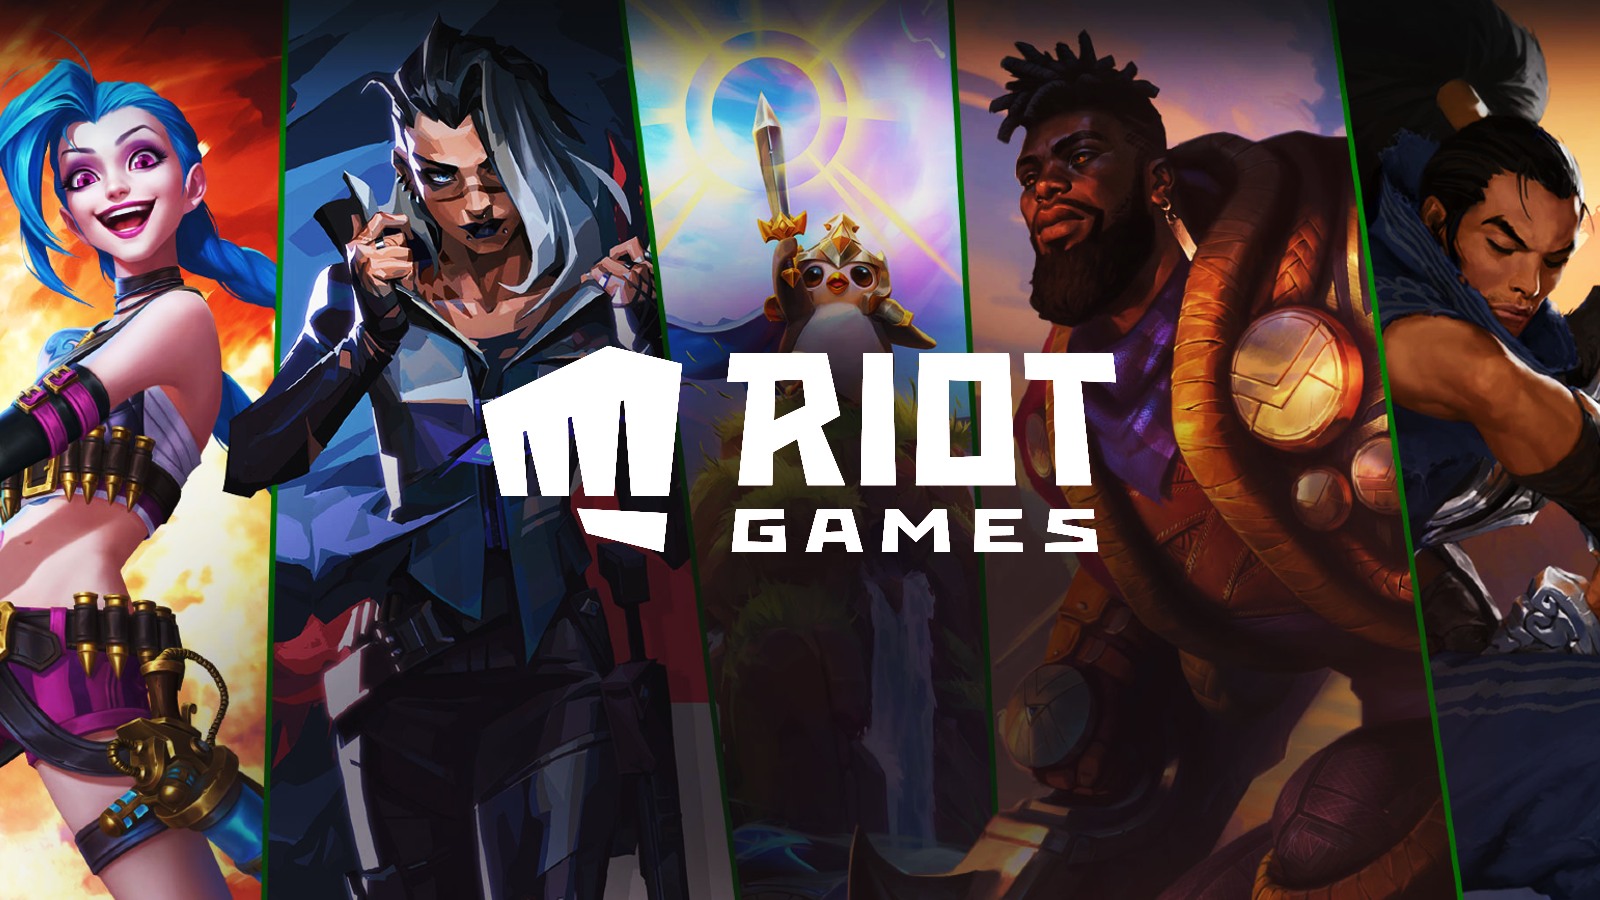 Riot Games says it will not pay a $10 million ransom demanded by attackers who stole League of Legends source code in last week's security breach